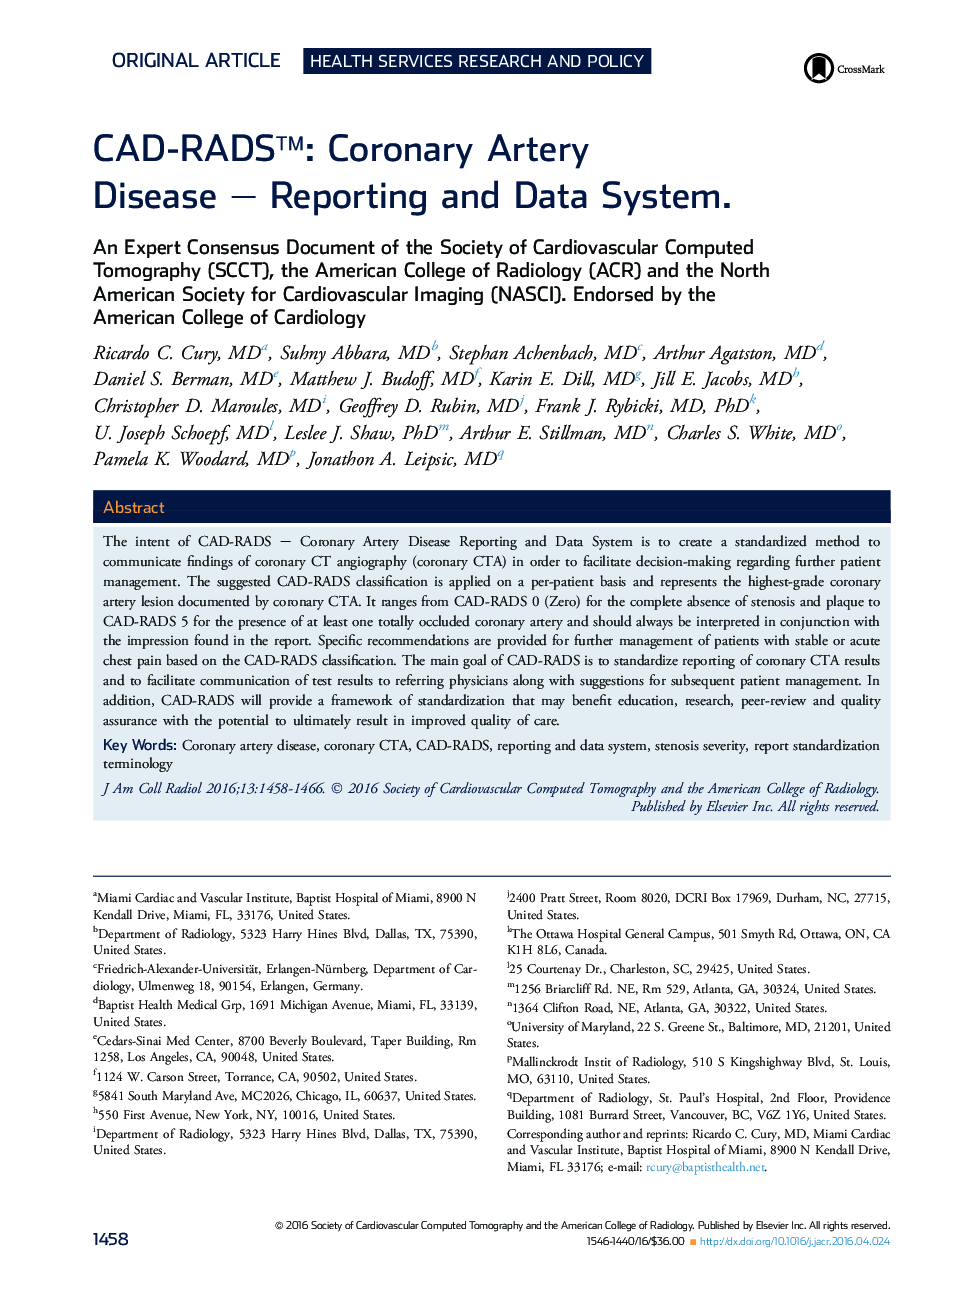 Original articleHealth services research and policyCAD-RADSâ¢: Coronary Artery DiseaseÂ -Â Reporting and Data System: AnÂ Expert Consensus Document of the Society of Cardiovascular Computed Tomography (SCCT), the American College of Radiology (ACR) and